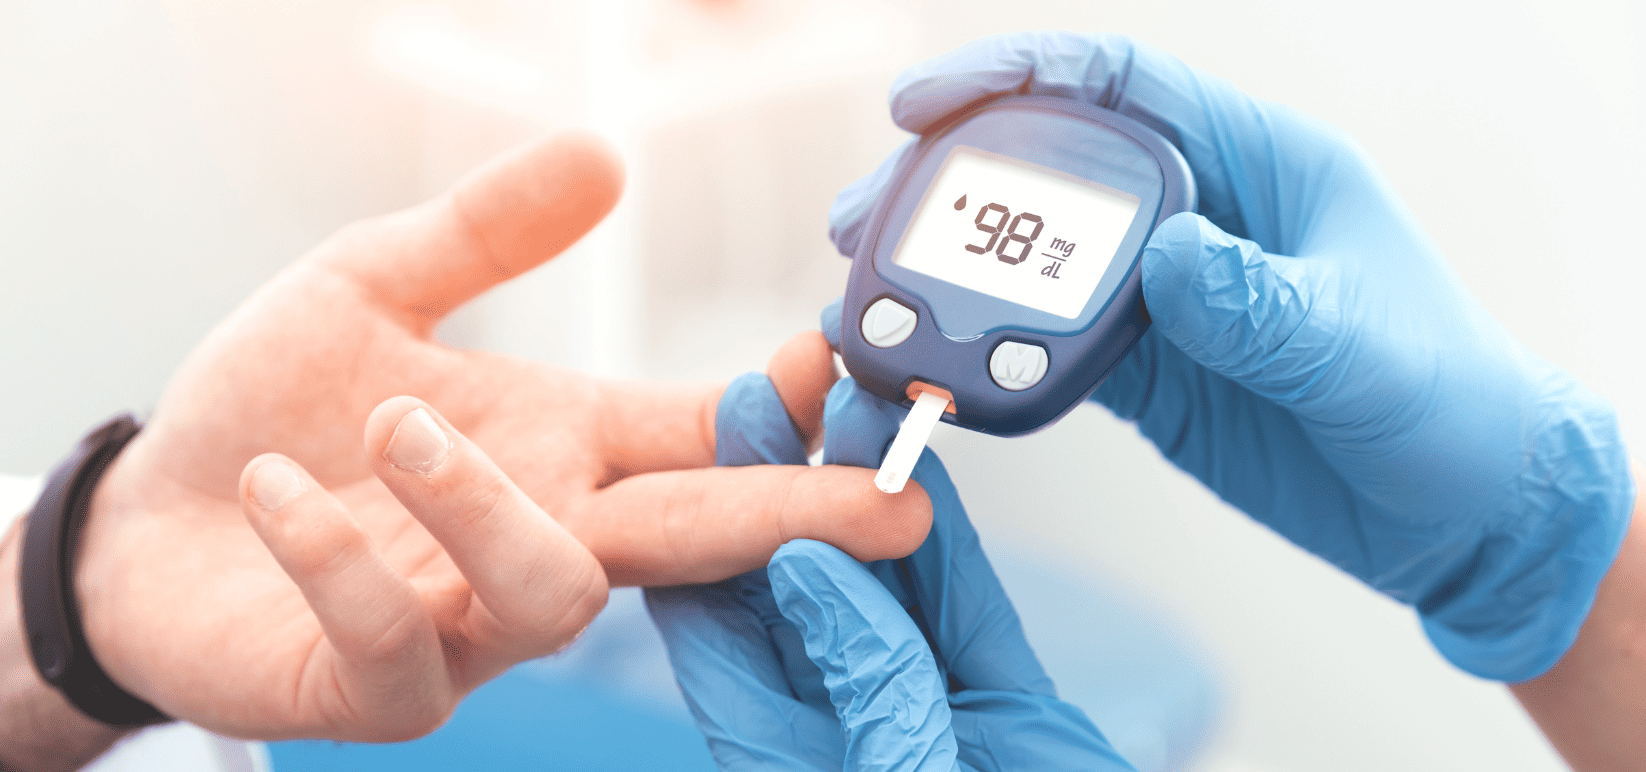 medical professional checking blood sugar levels of patient by pricking finger